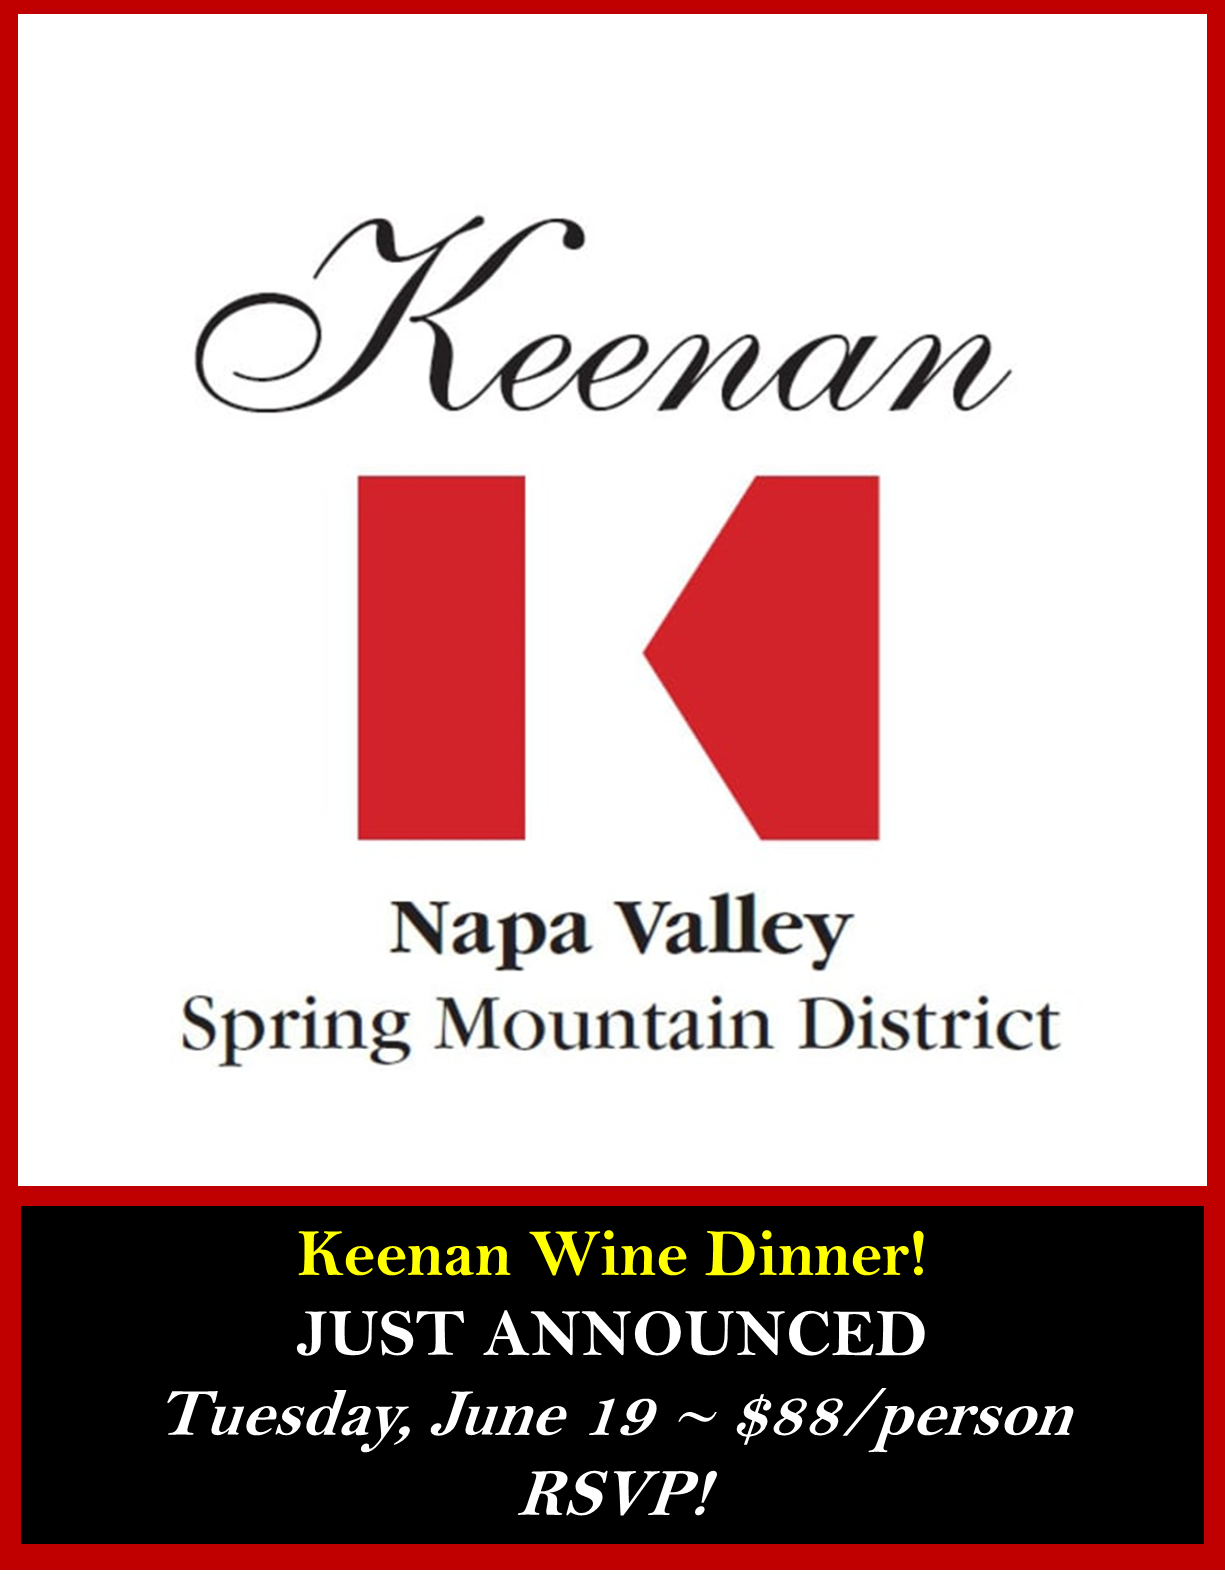 <a id="Solare-Keenan-Wine-Dinner"></a>Napa Valley Winemaker Dinner with Keenan Winery